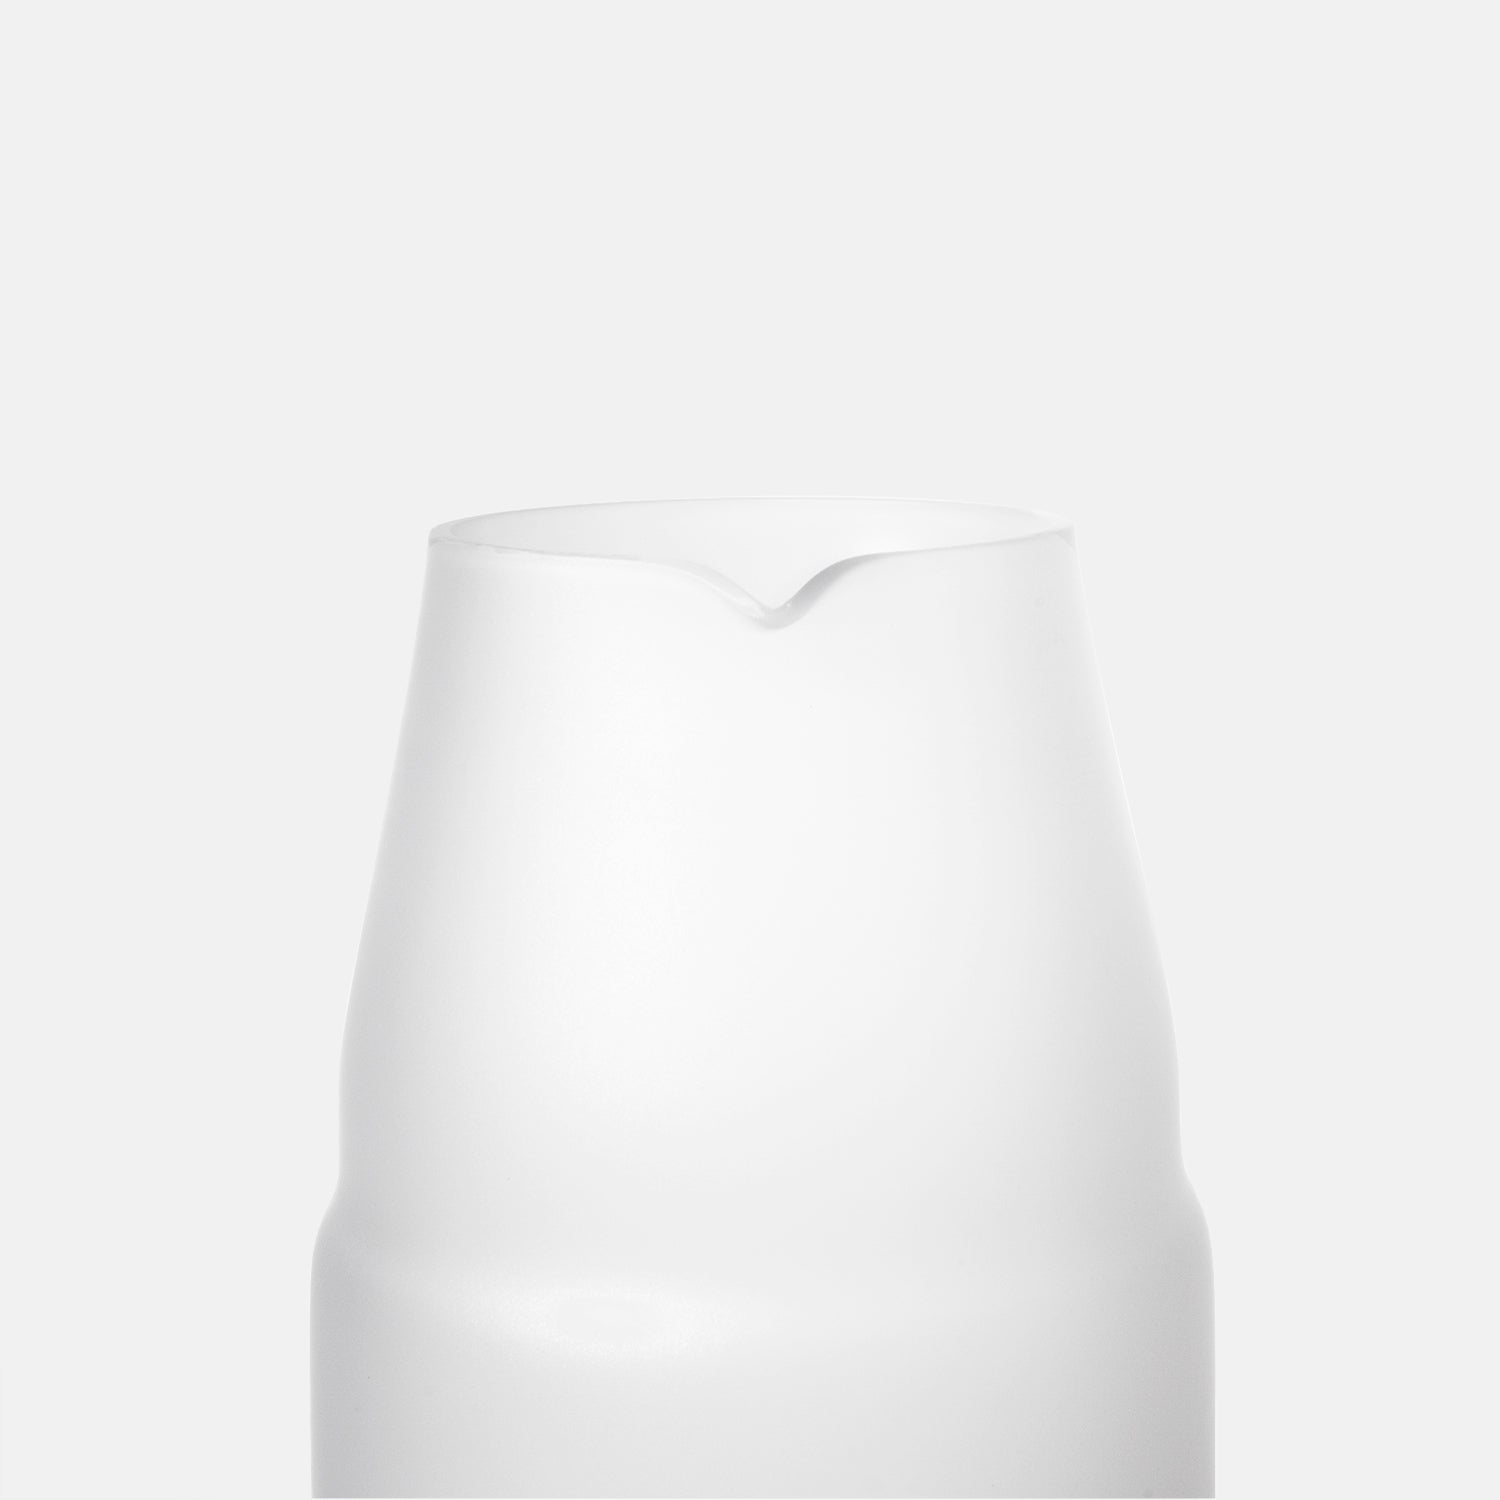 Large Night Carafe Frosted